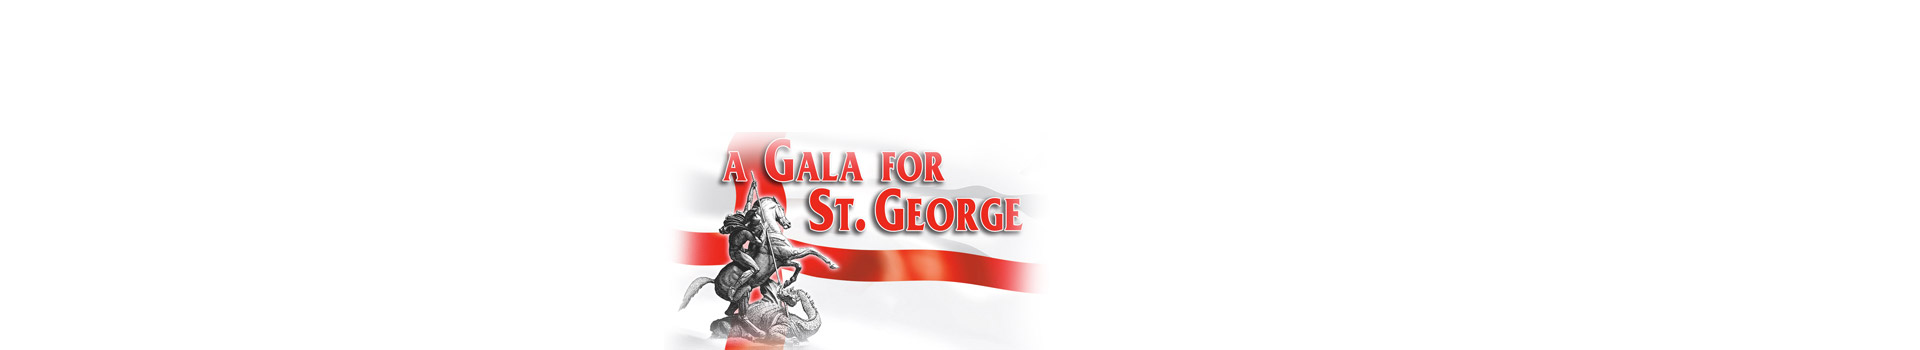 A Gala For St George tickets at the Royal Albert Hall